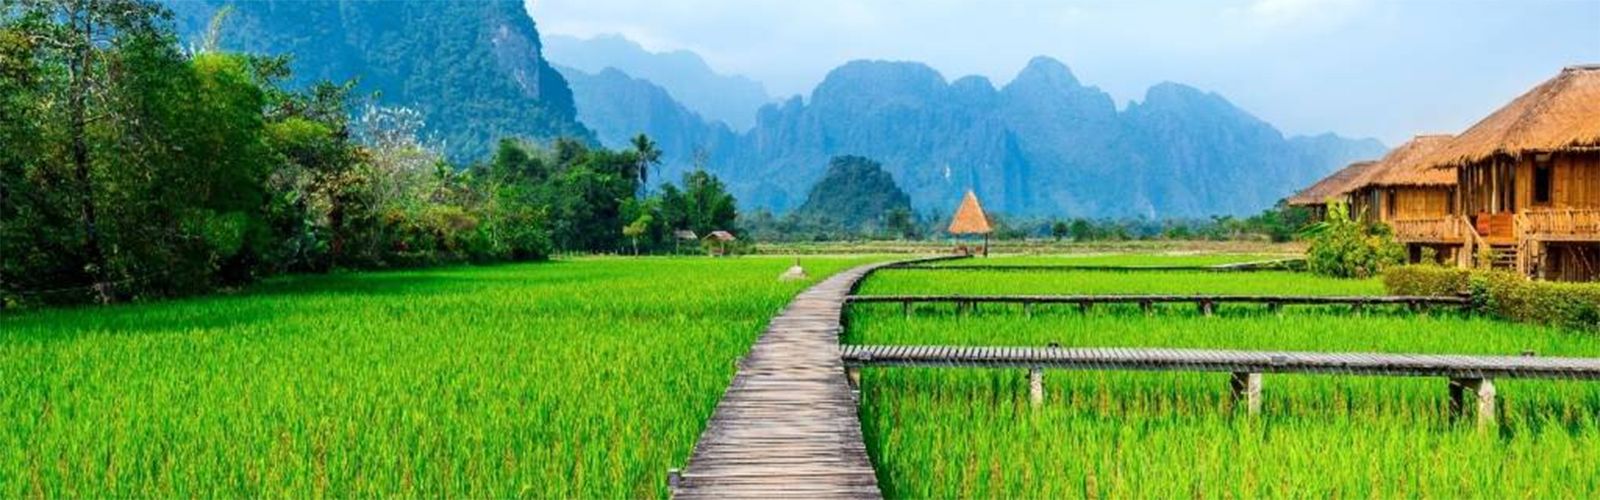 Best Places To Go In Laos | best place | Asianventure Tours